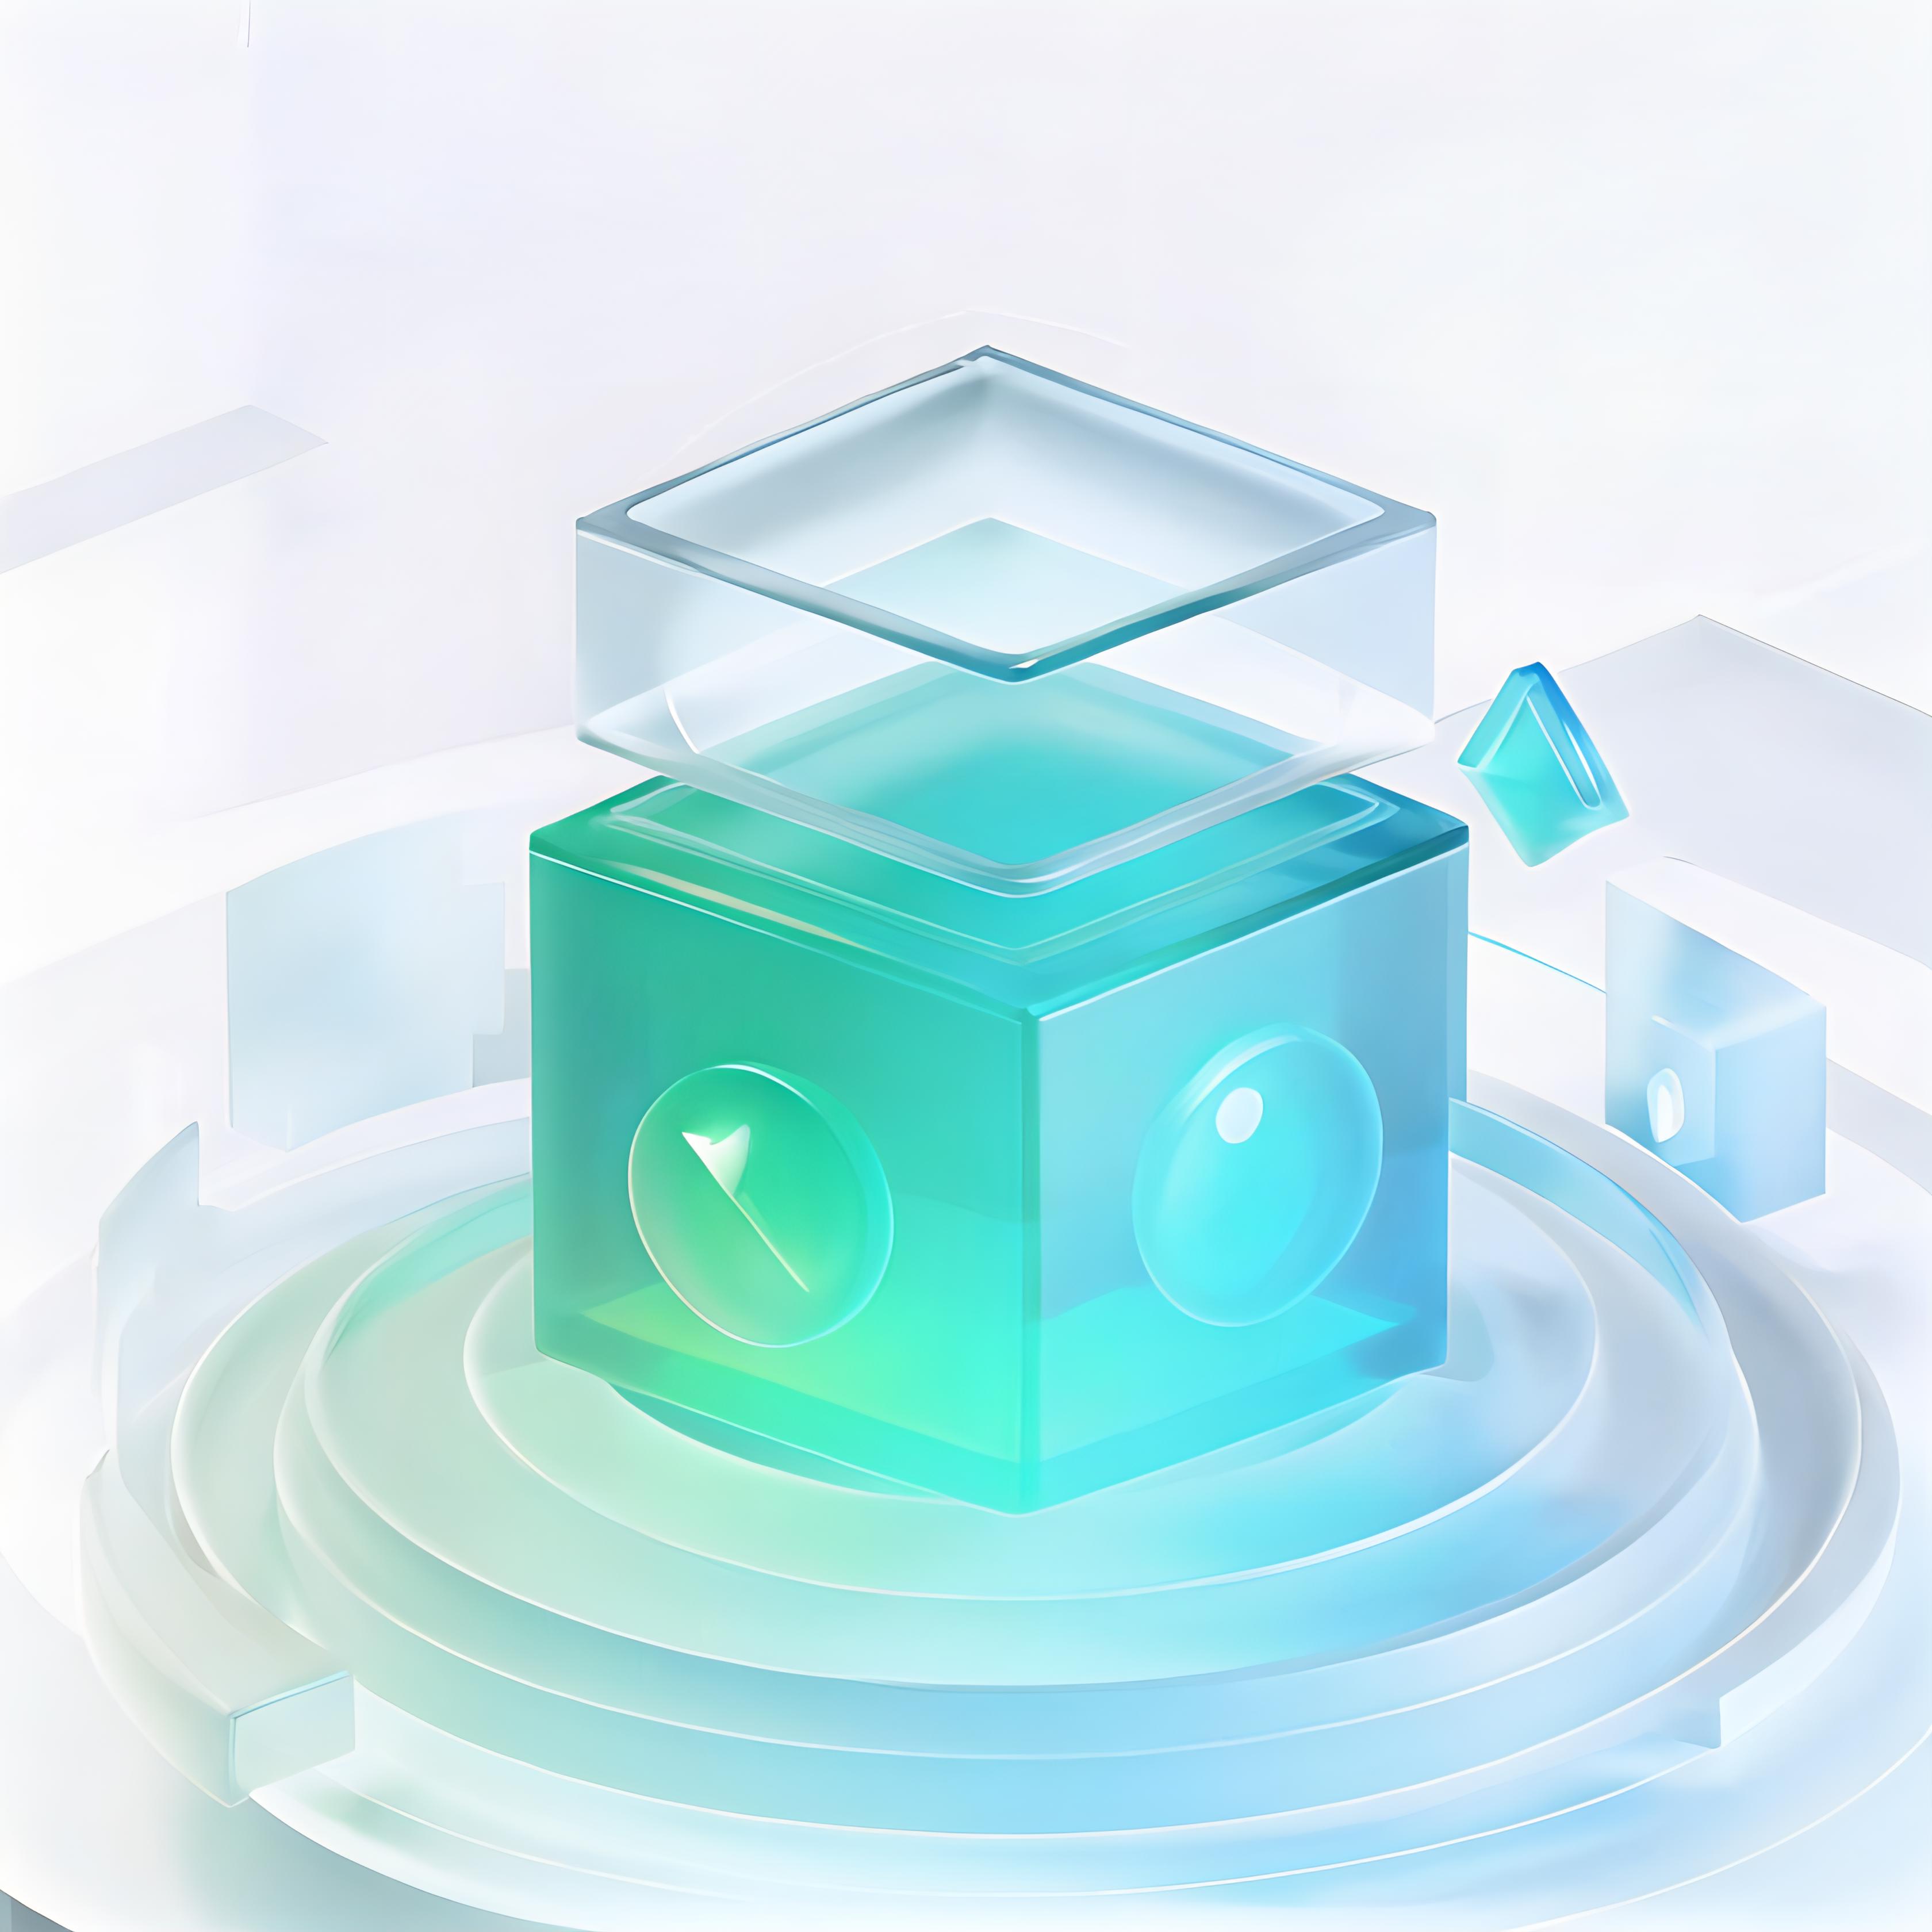 A 3D Green and Blue Box on a White Background.